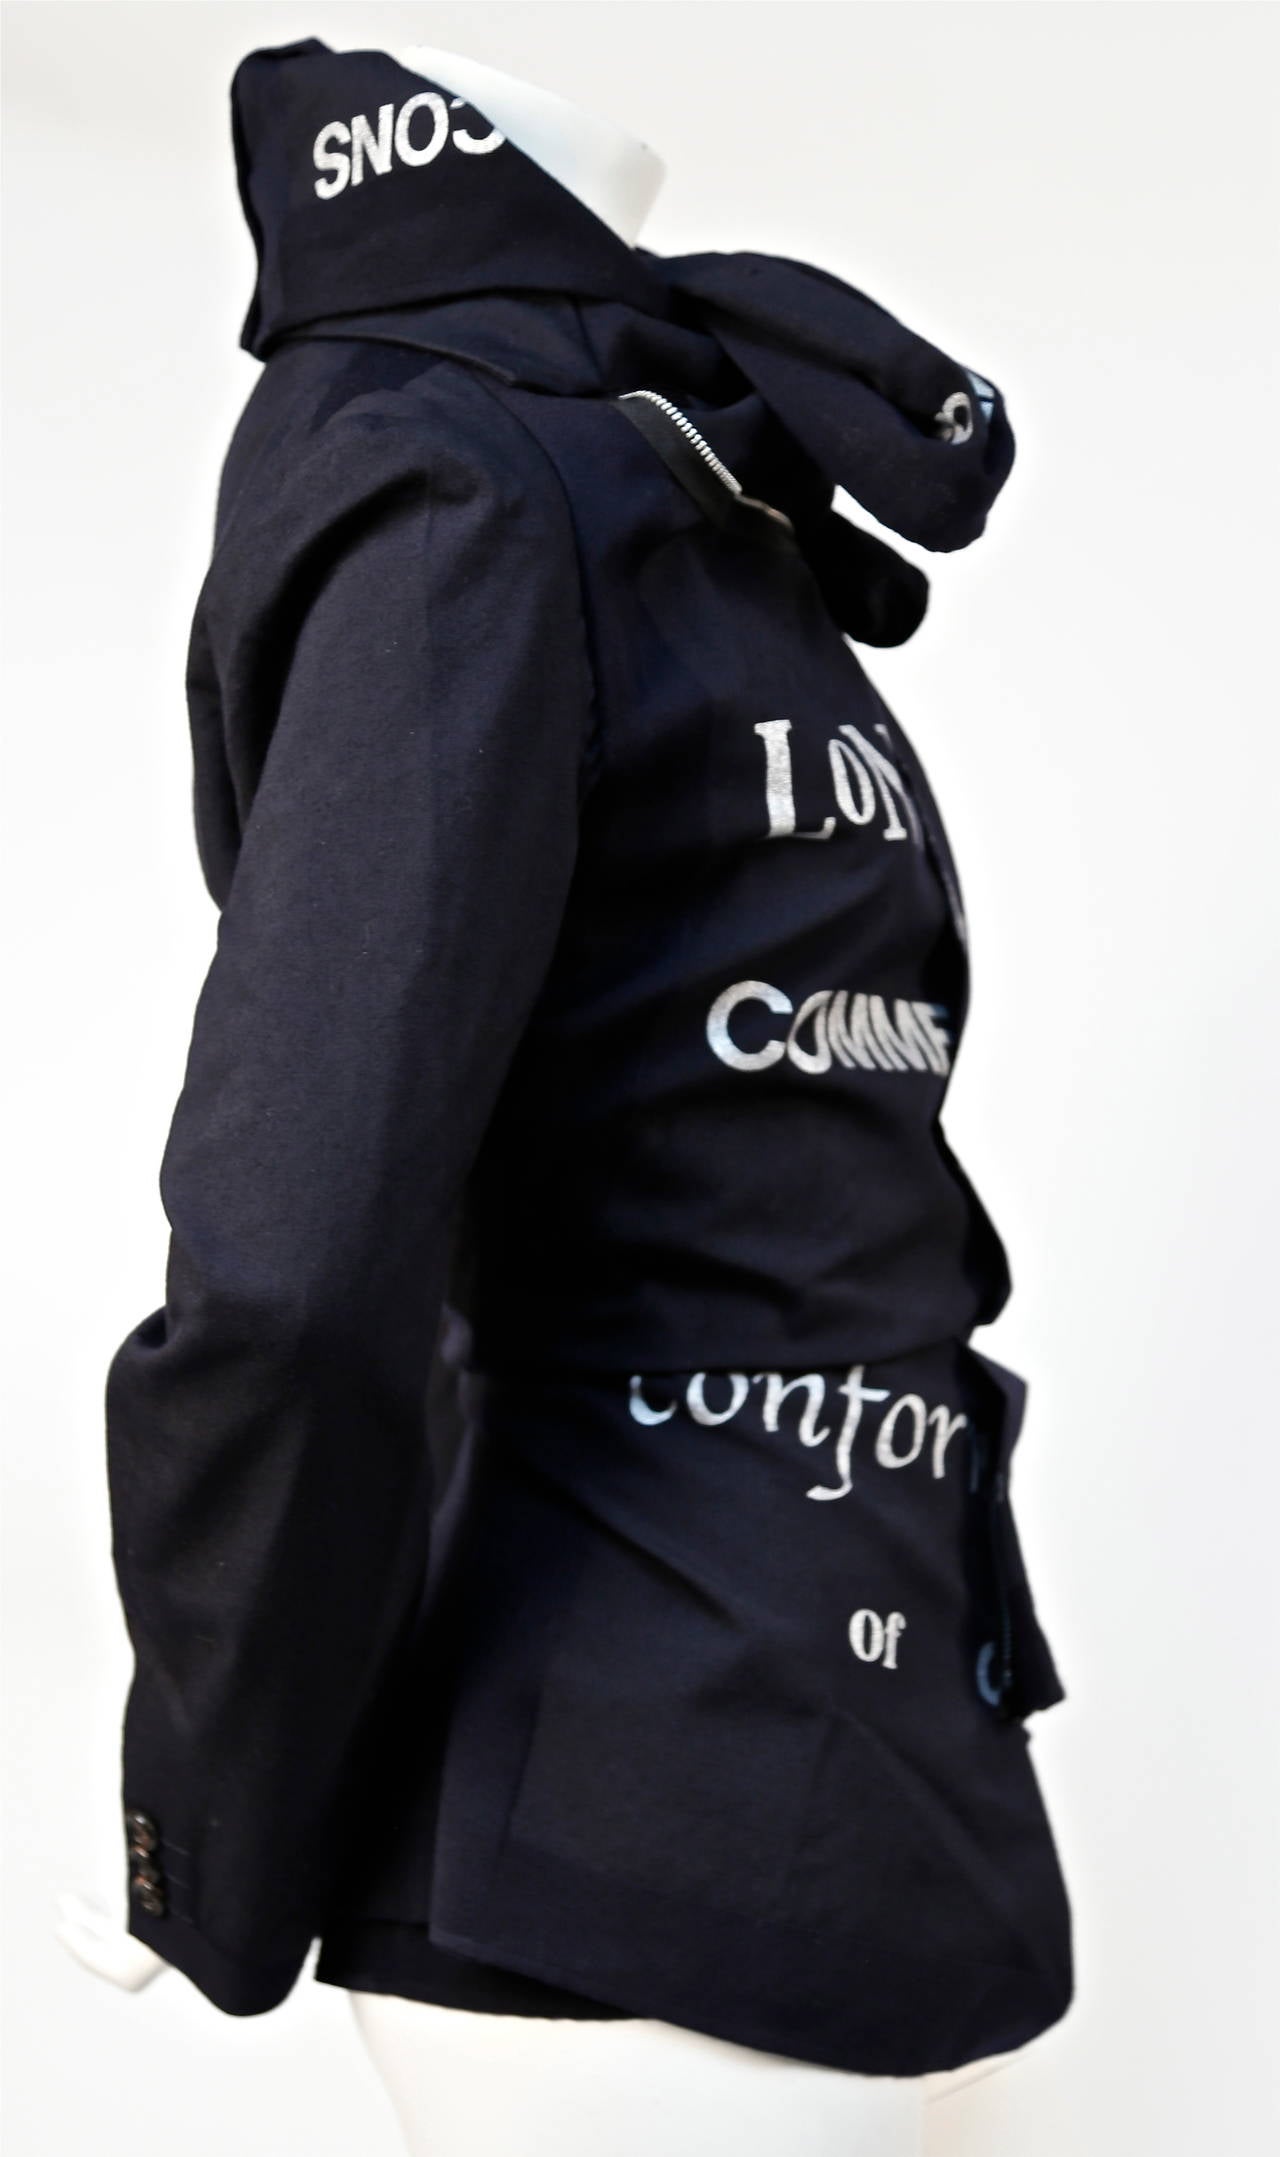 Asymmetrical woven jacket with metallic silver screen printed font from Comme Des Garcons dating to fall of 2003 as seen on the runway. Color is a deepest navy/black. Labeled a size 'M' however this jacket best fits a size XS or S (26